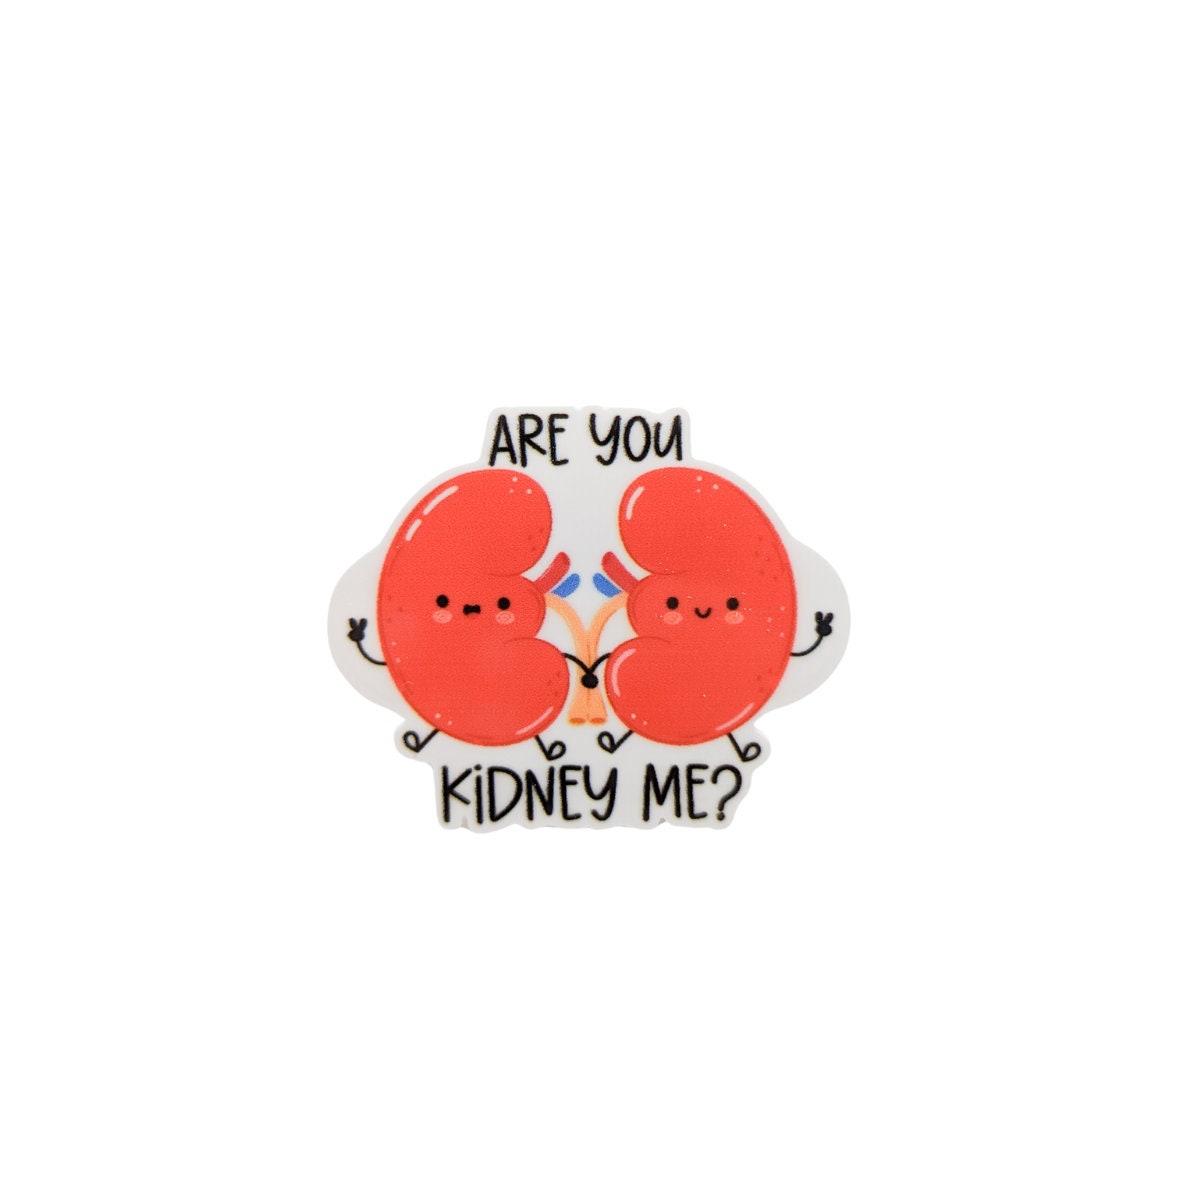 Are you kidney me? / renal / PLASTIC Add on / 10B30